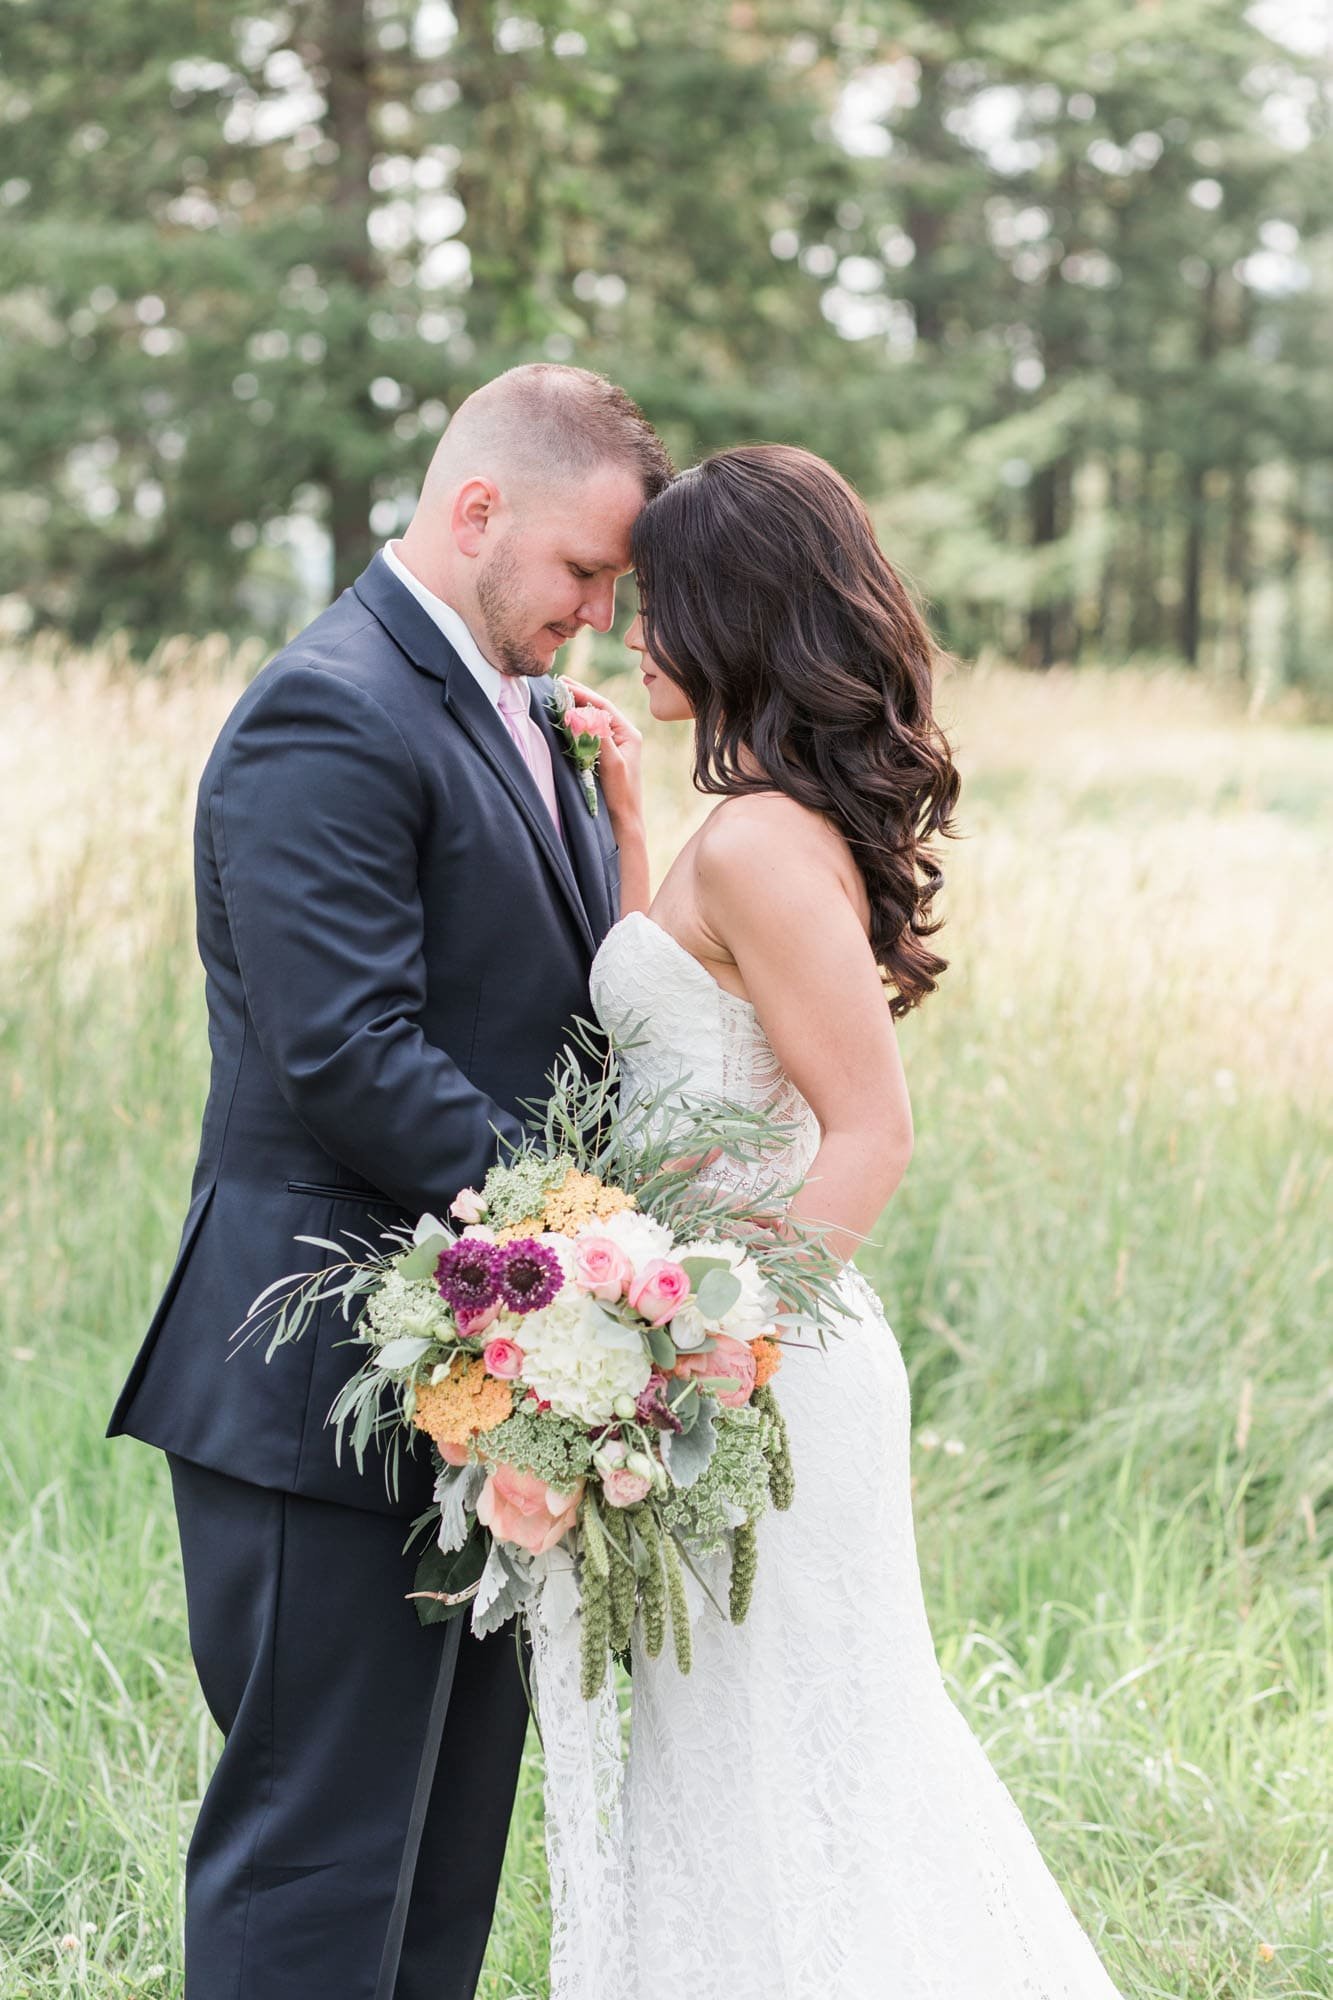 First look at outdoor wedding venue in the Columbia River Gorge